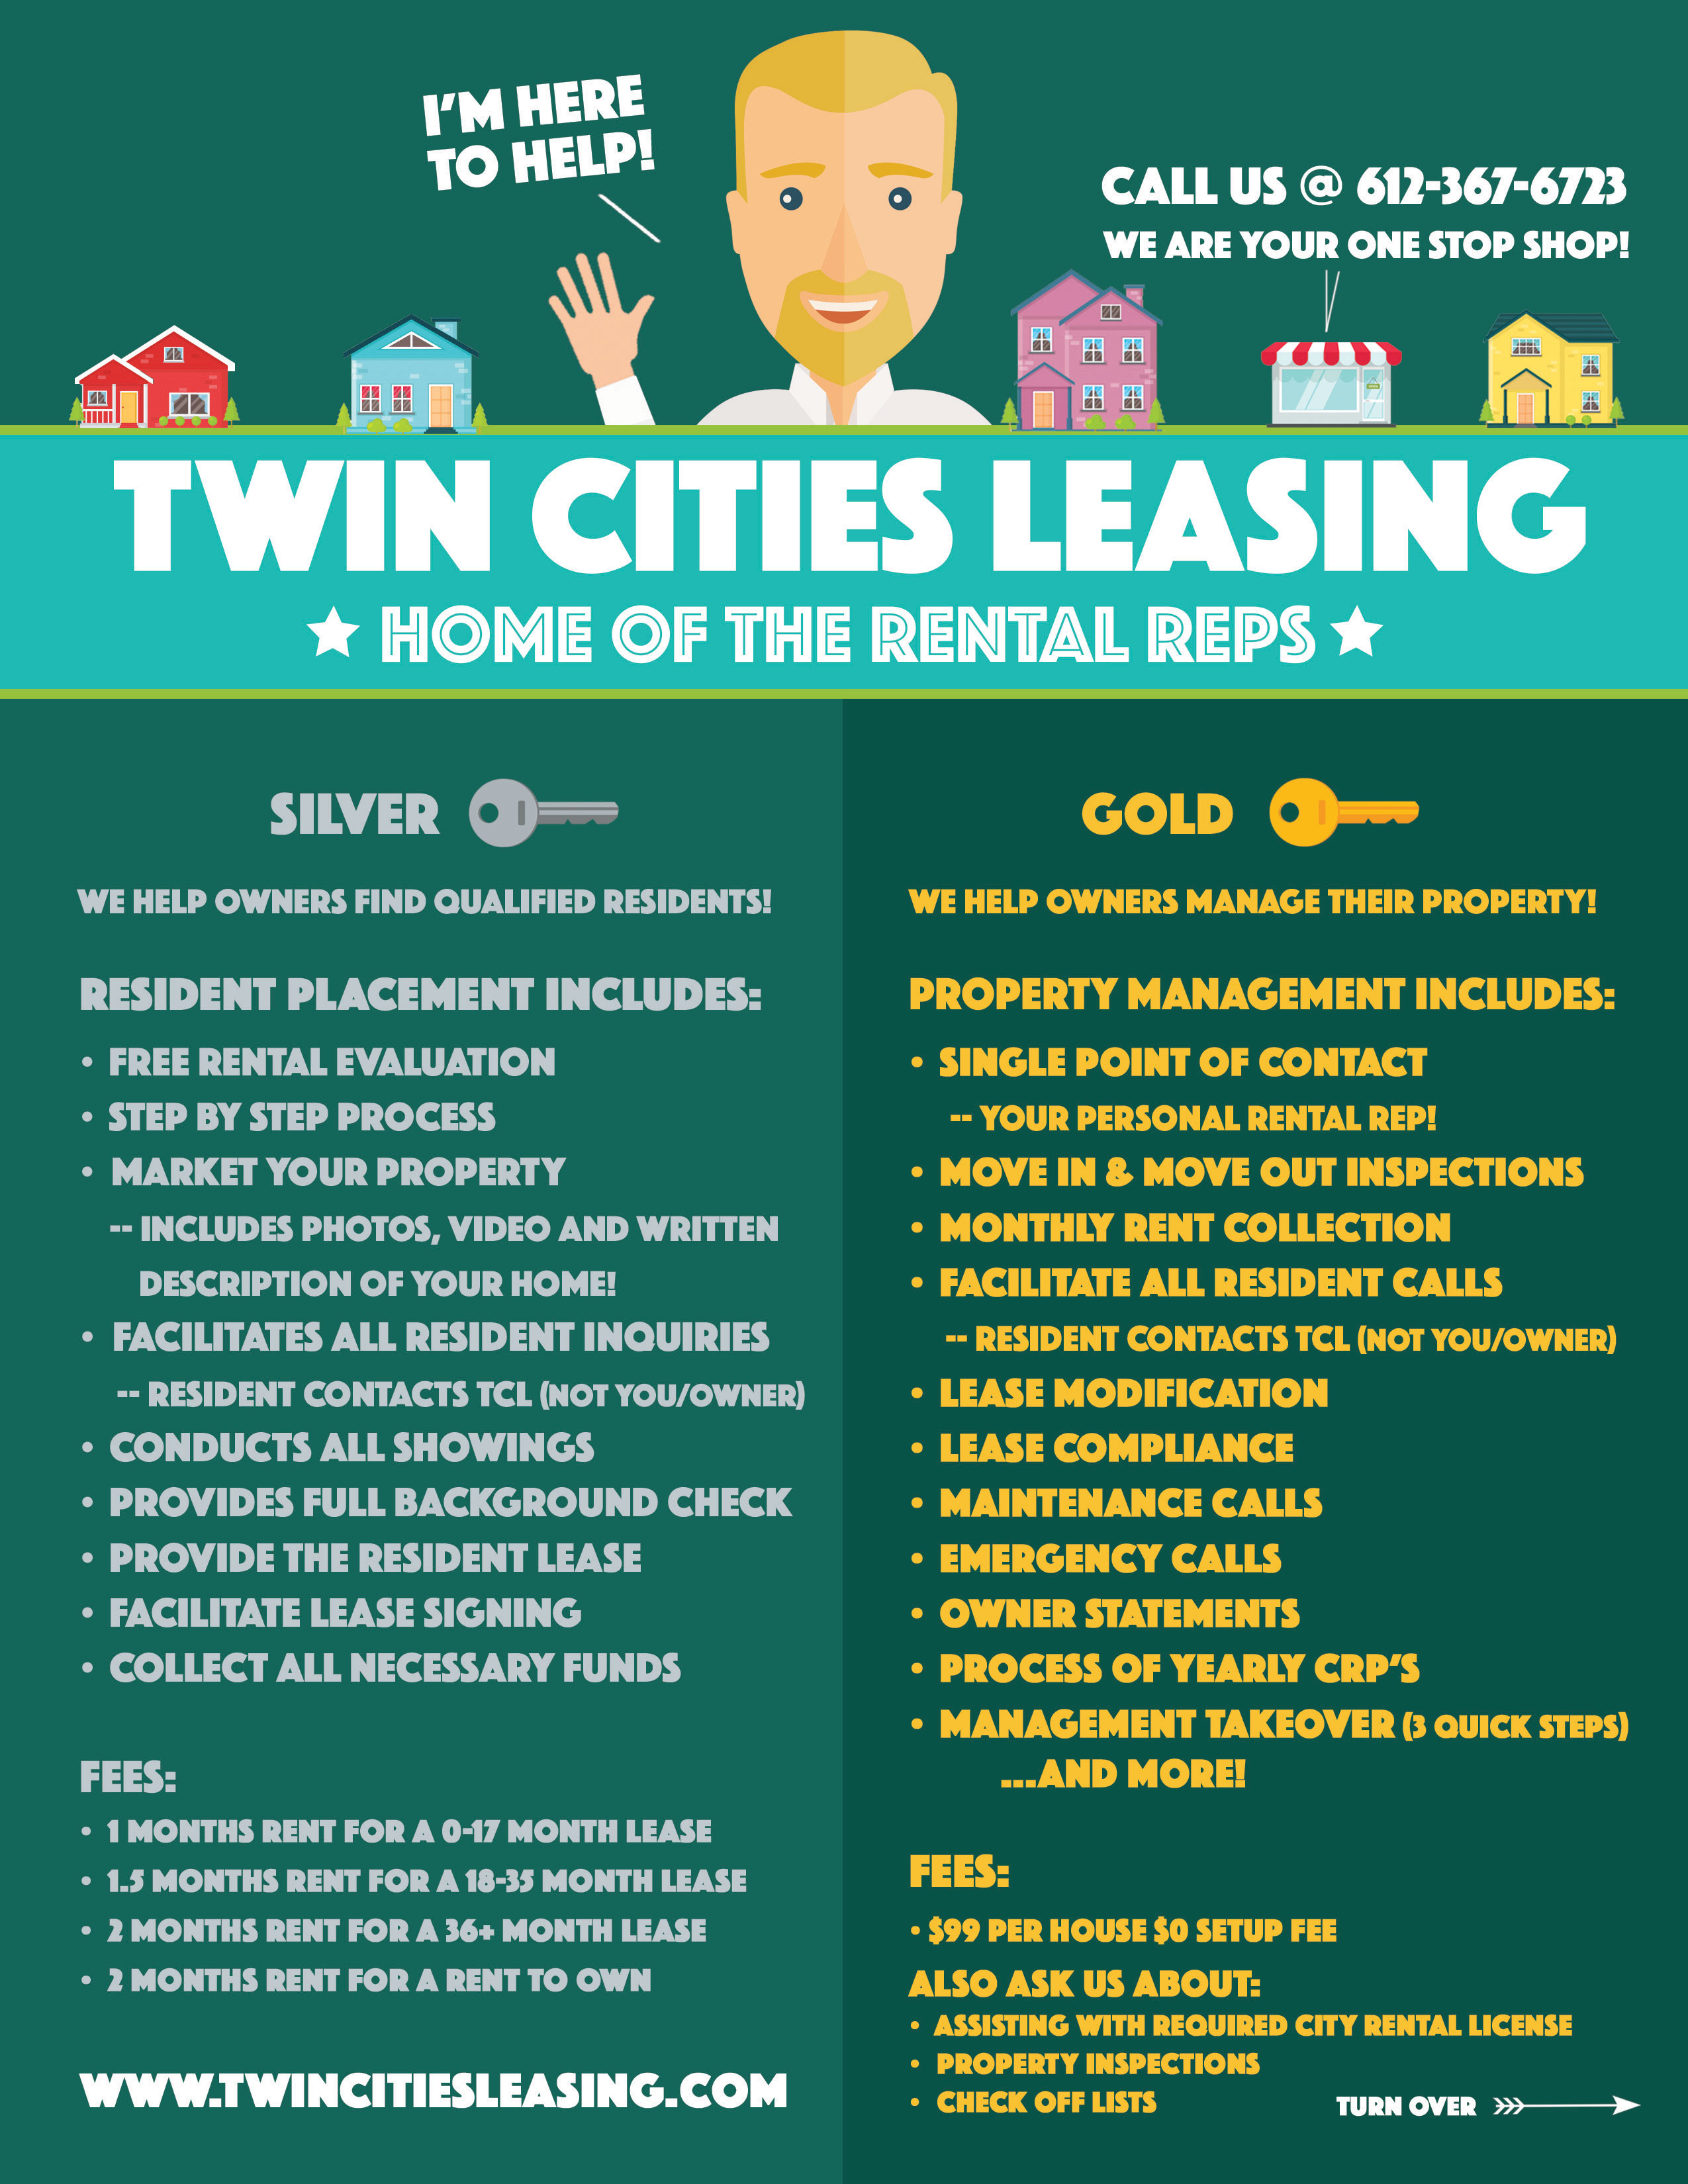 twin-cities-leasing-rental-reps-mn-9